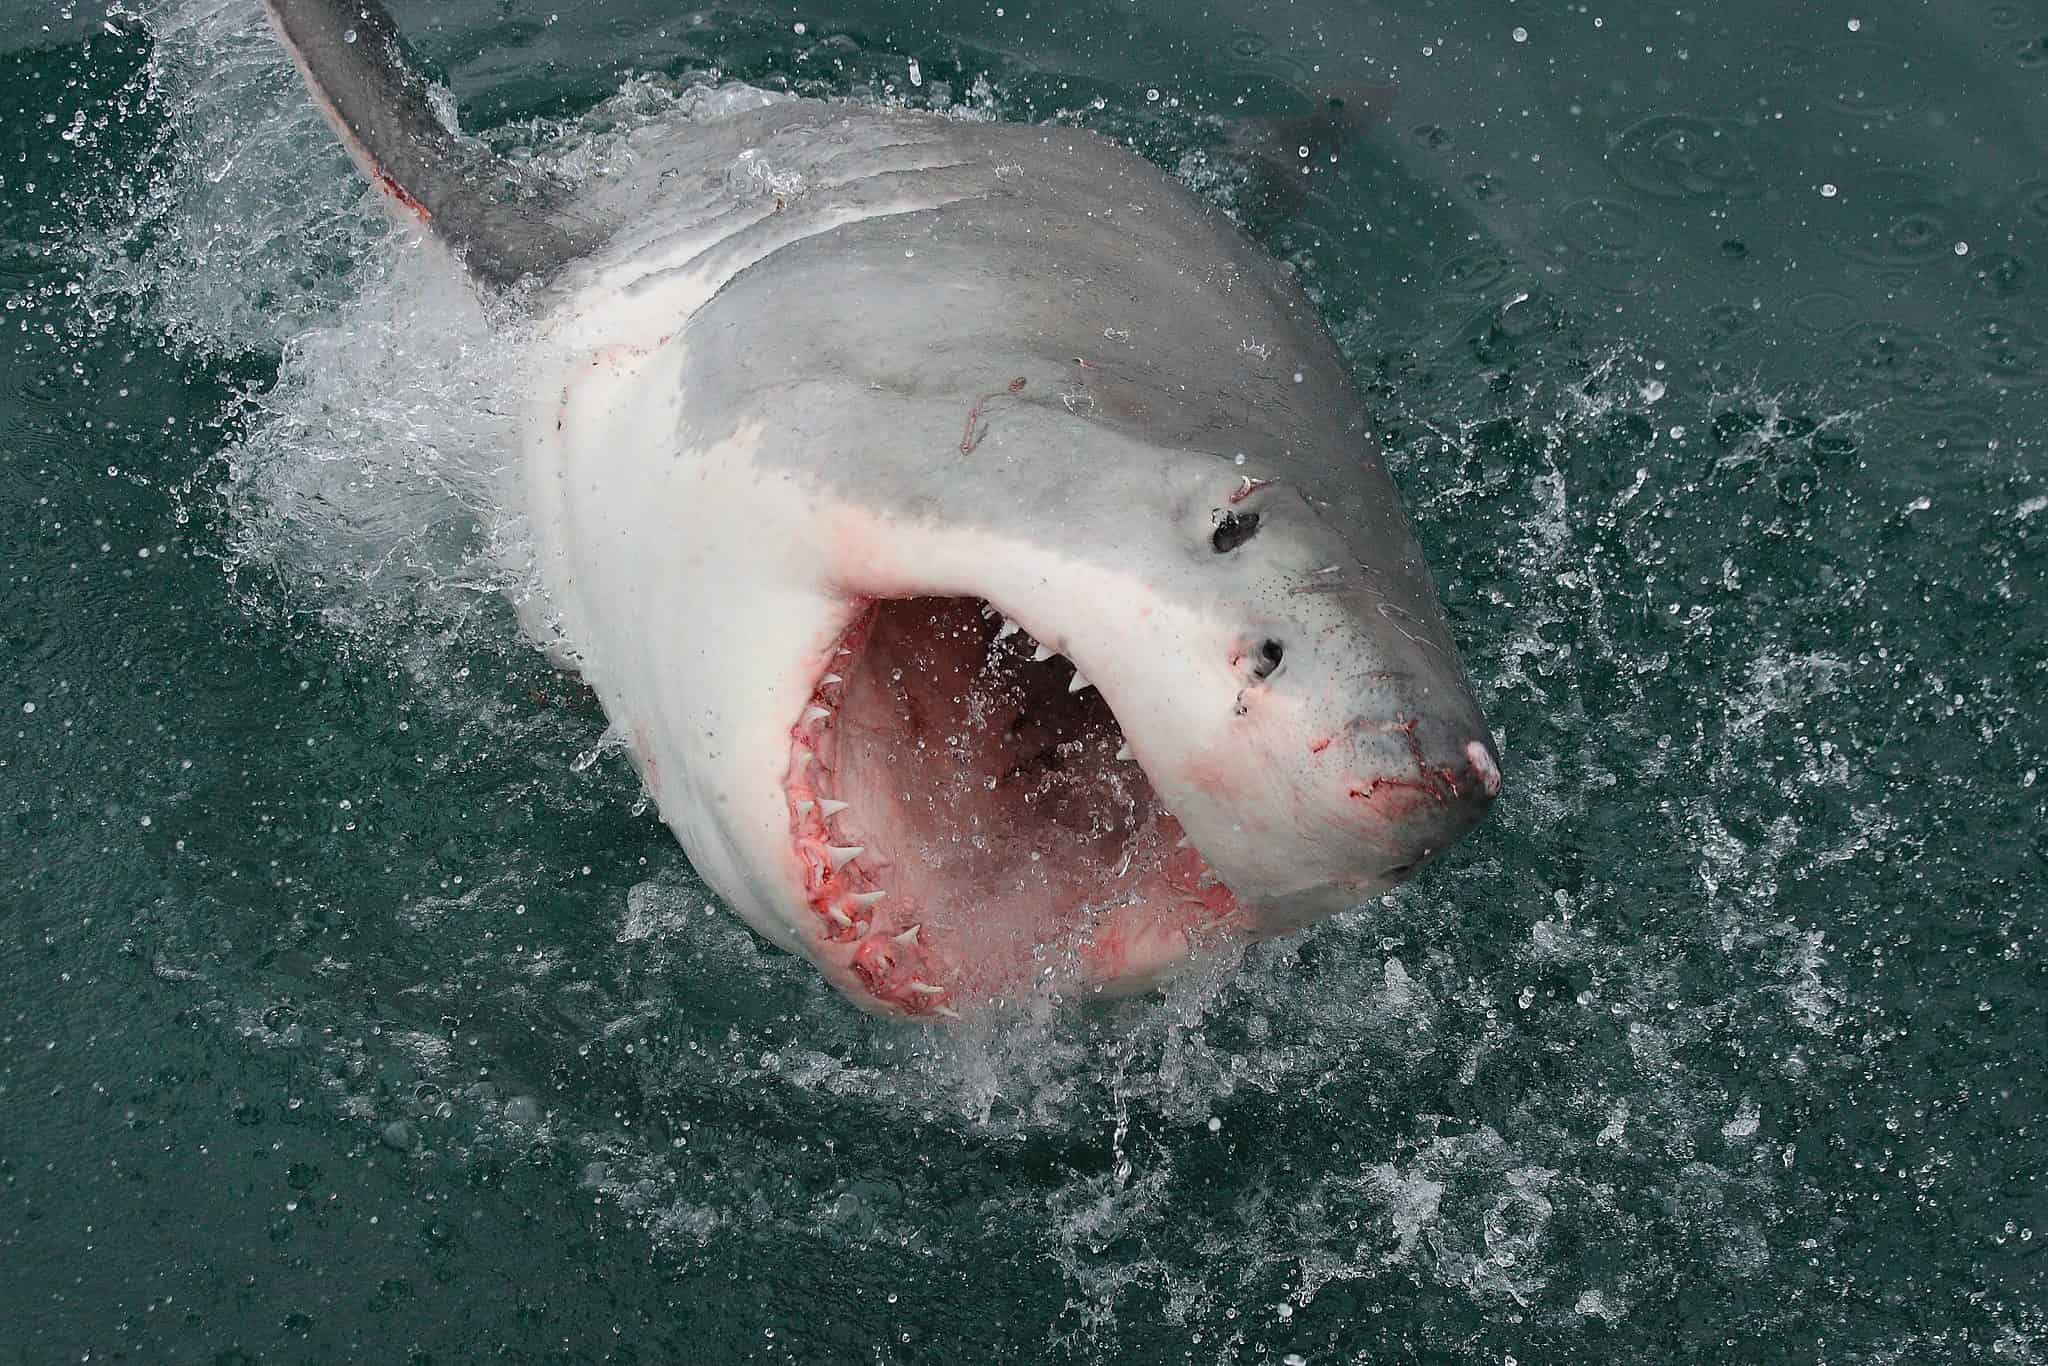 Watch a Bird Escape a Great White Shark by Pooping In Its Face - AZ Animals